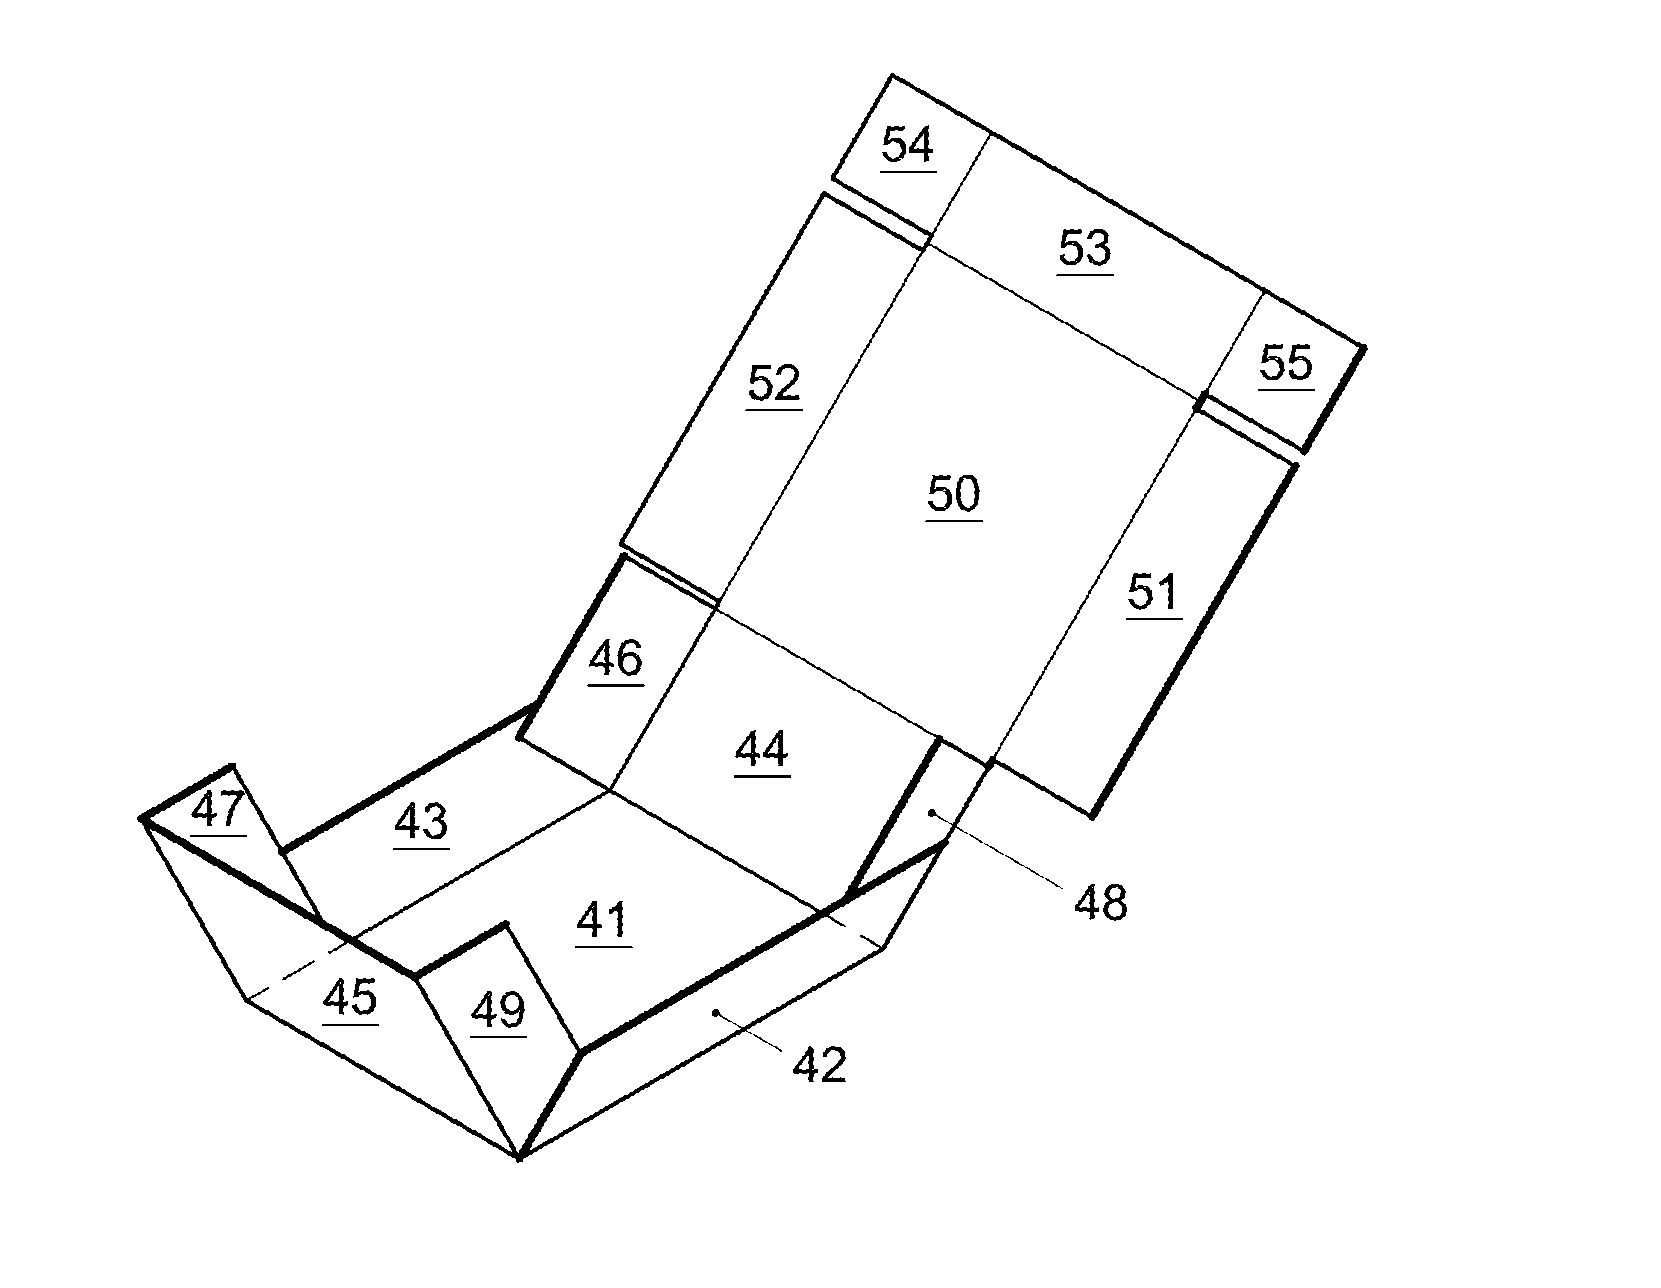 A method and system for automatically processing blanks for packaging boxes